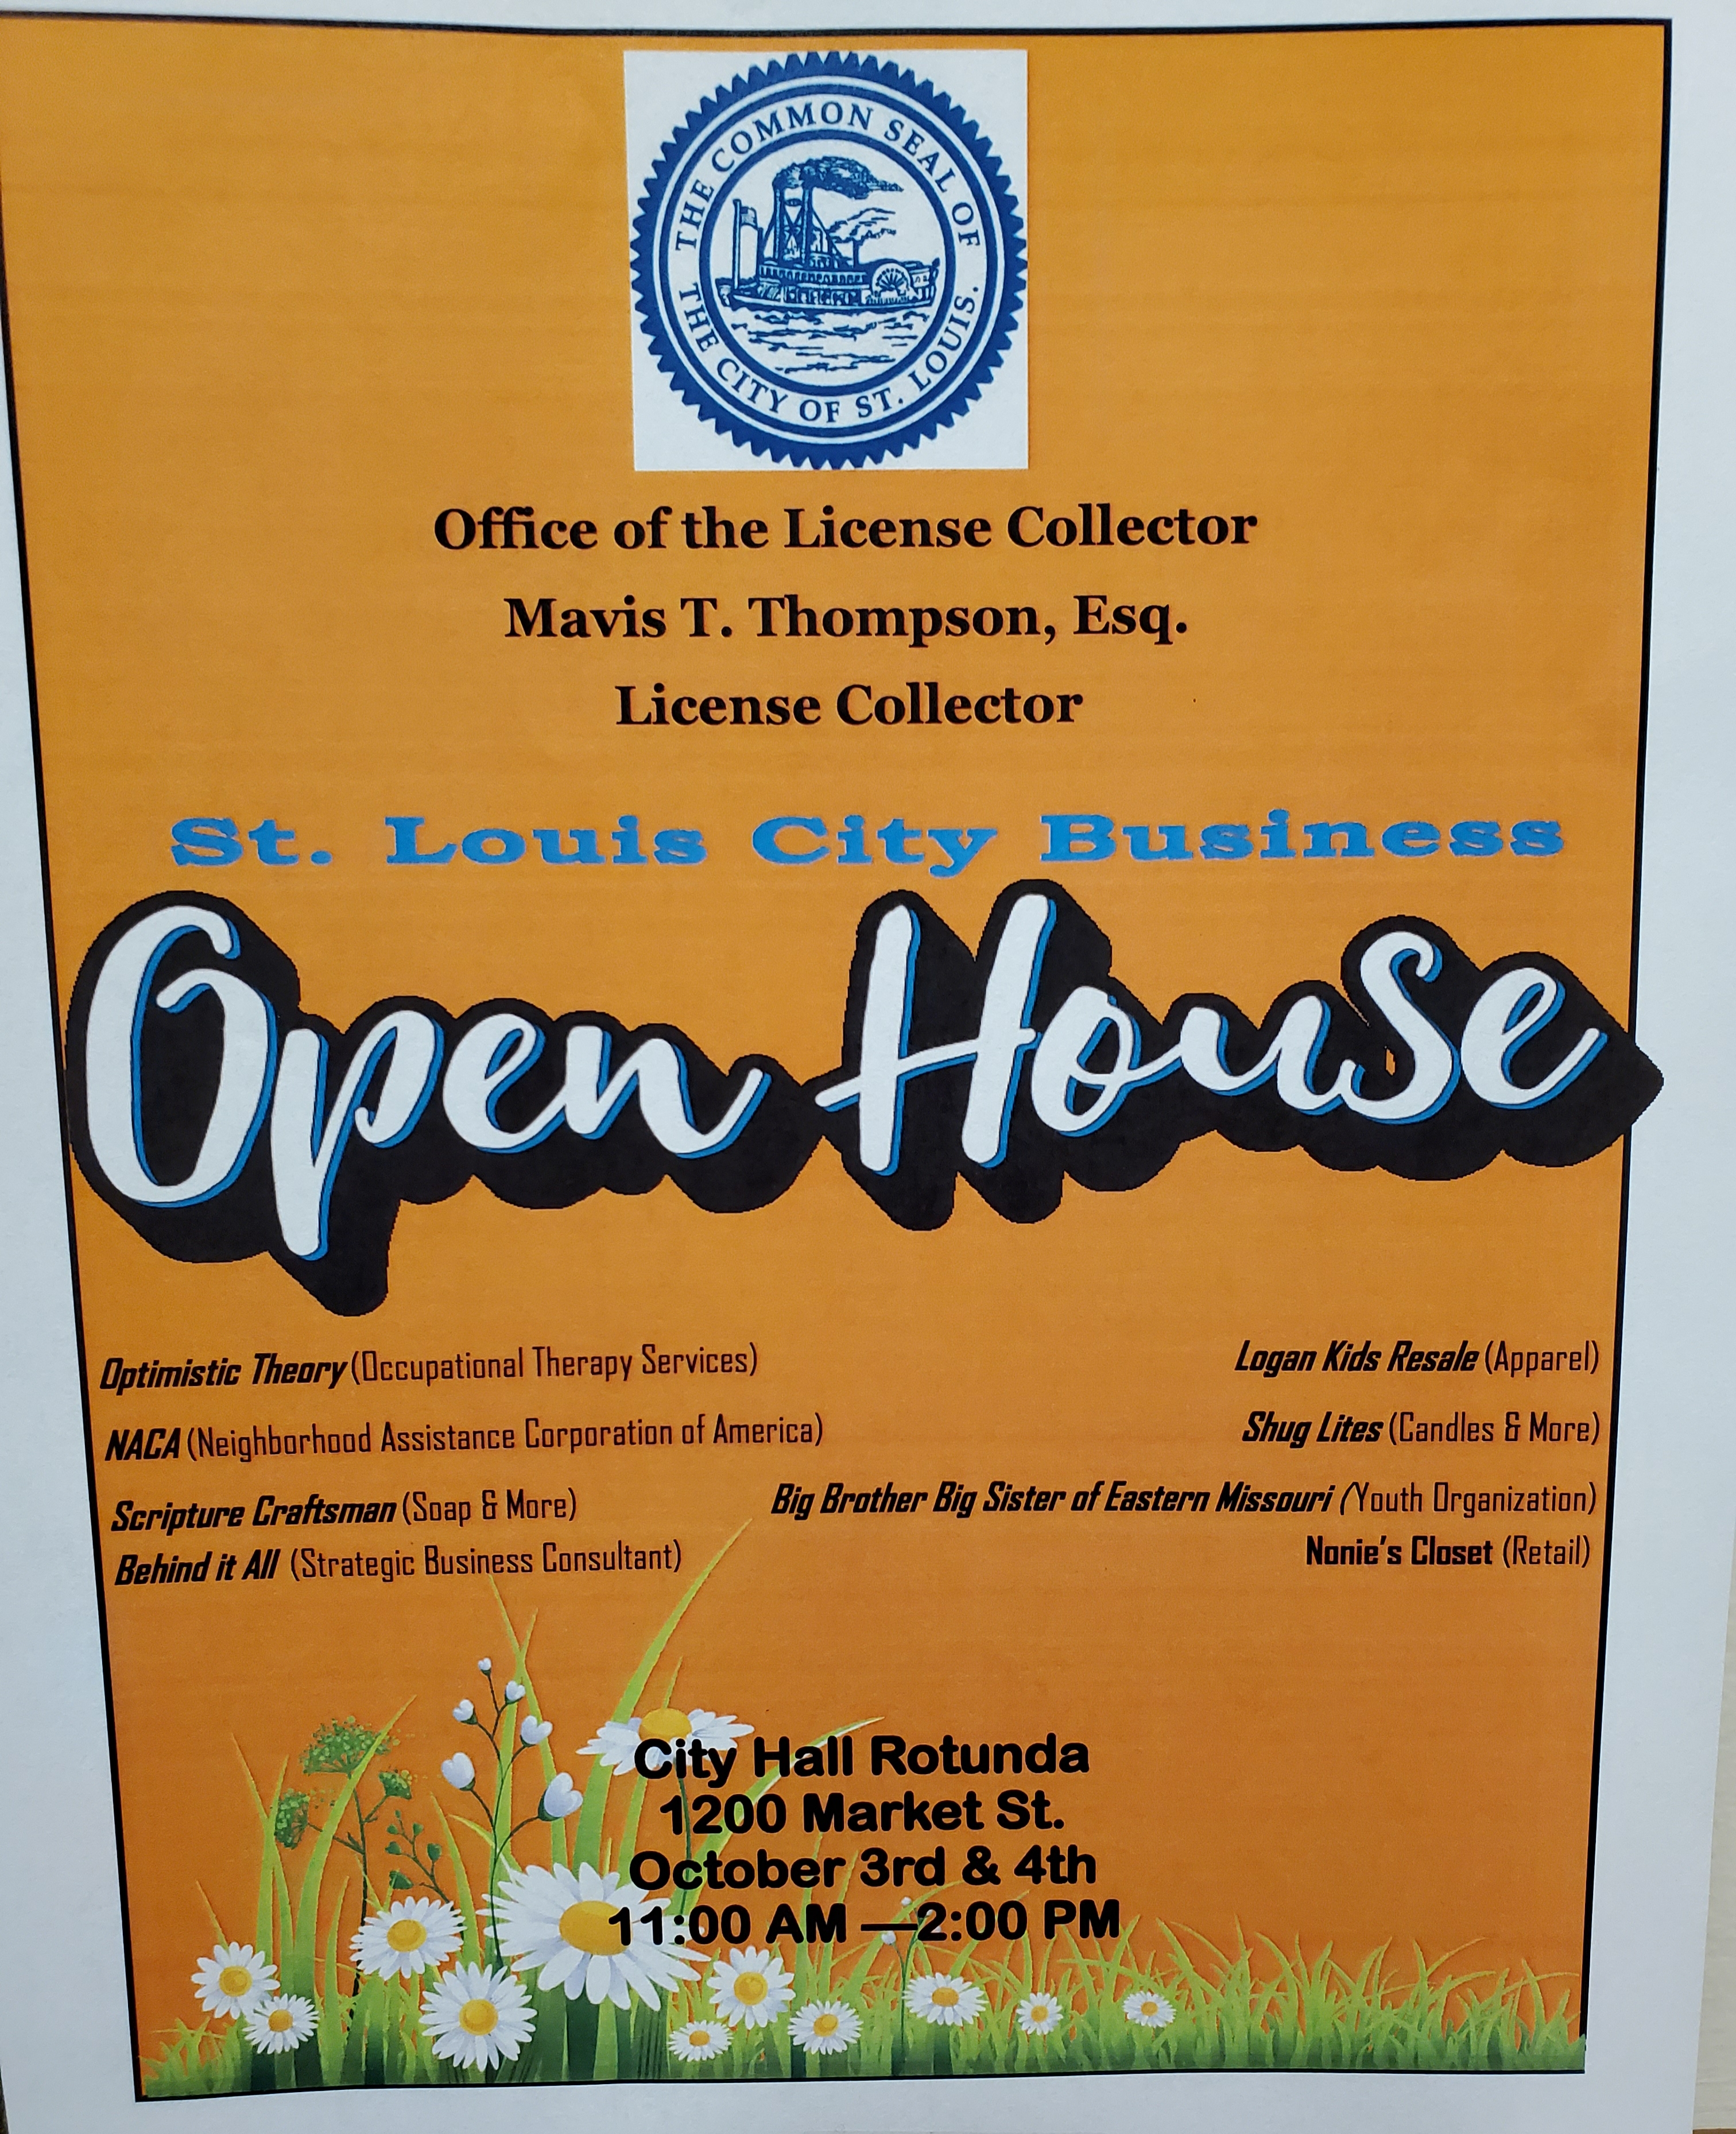 Flier from the License Collector's Office with details about this month's Open House